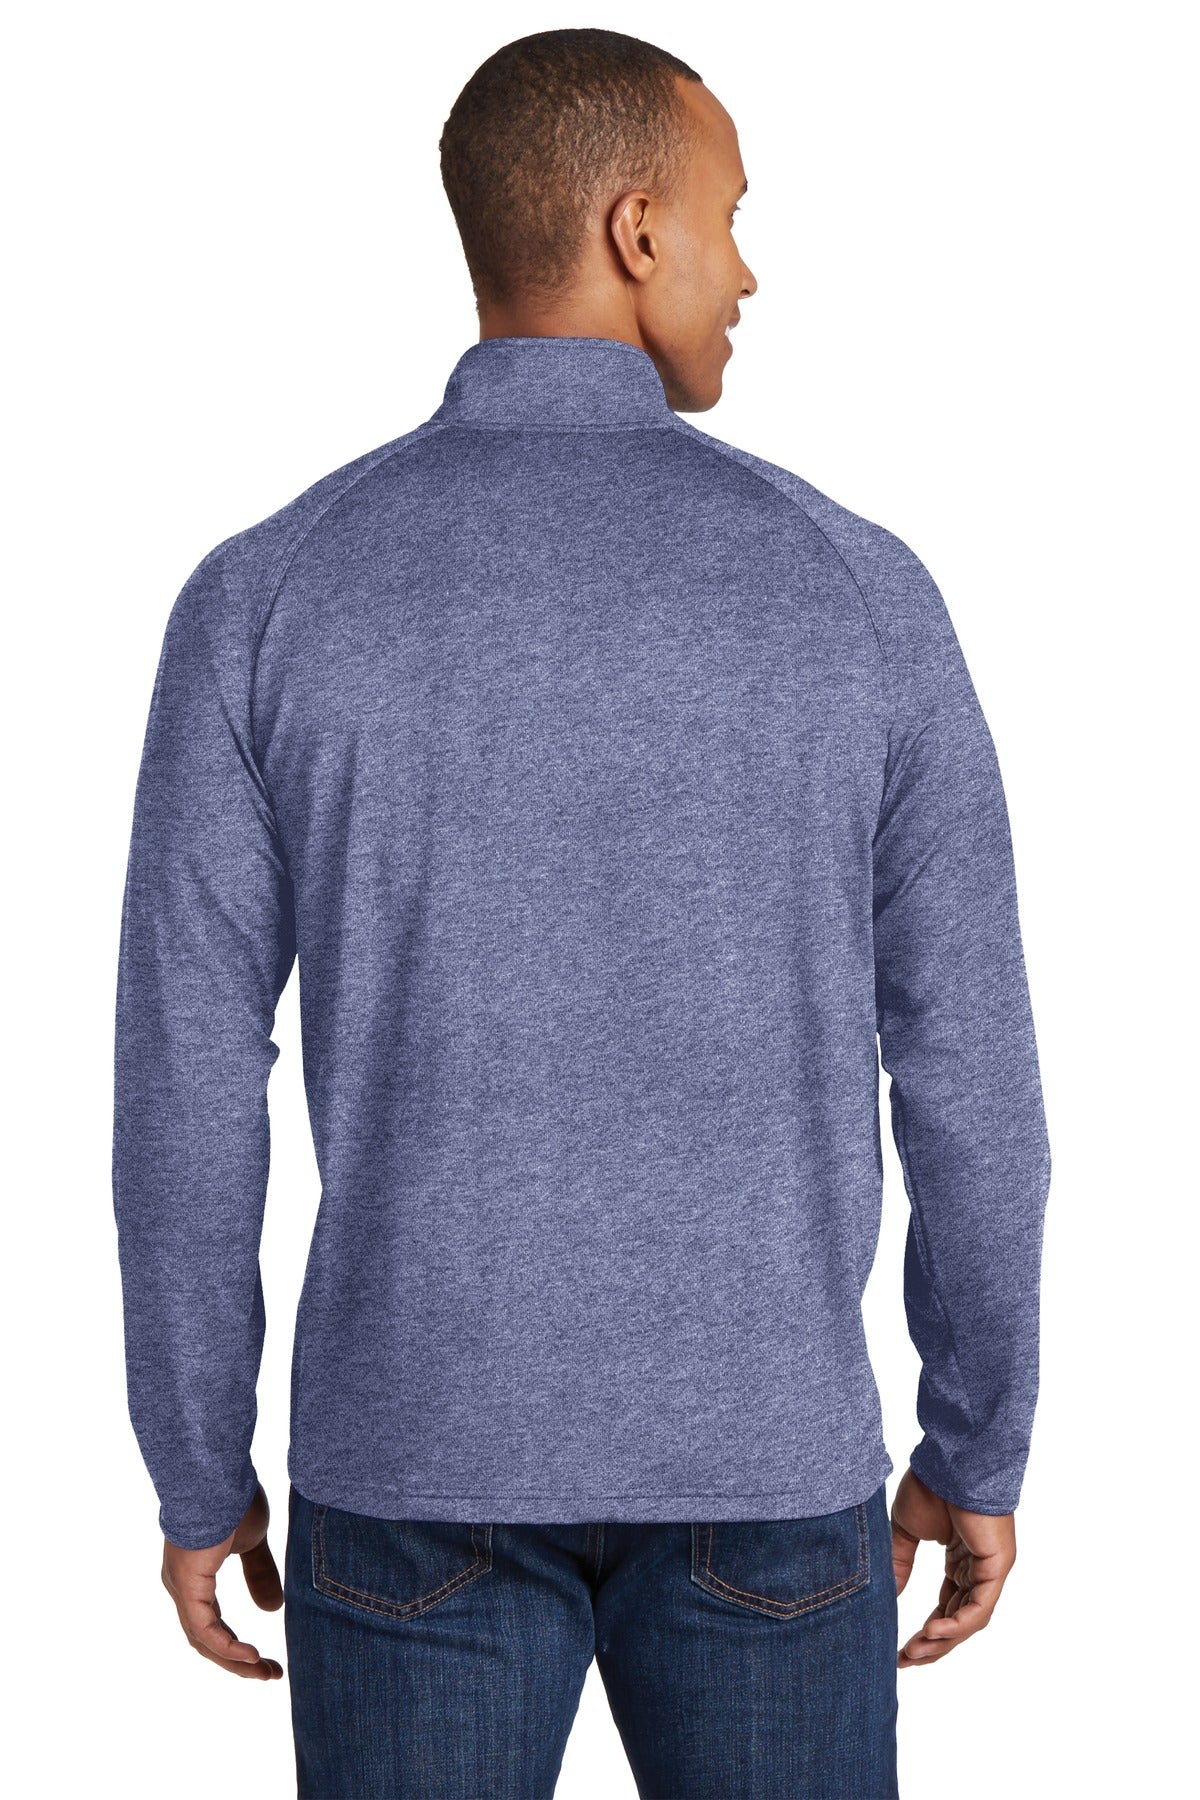 Swaasi Core - Sport-Tek® Sport-Wick® Stretch 1/2-Zip Pullover with EMB Logo